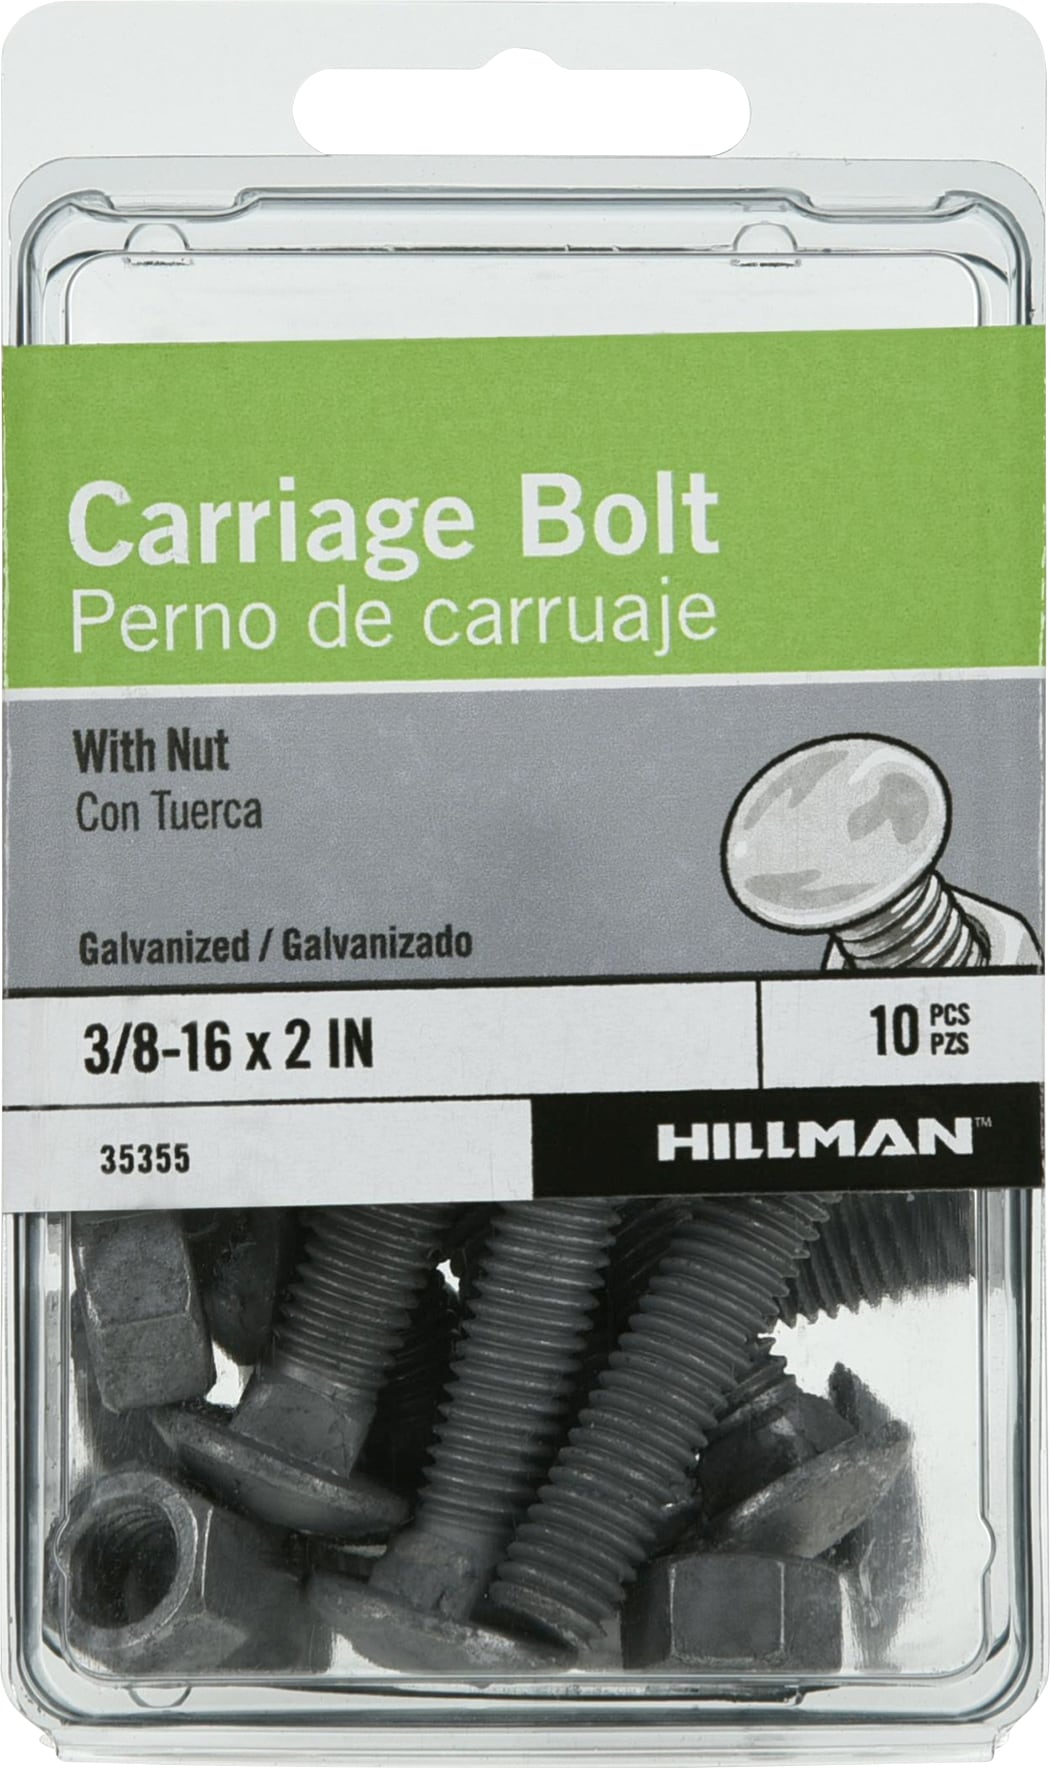 Prime-Line 1/4-20 Carriage Bolts and Nuts with Smooth, Domed Heads